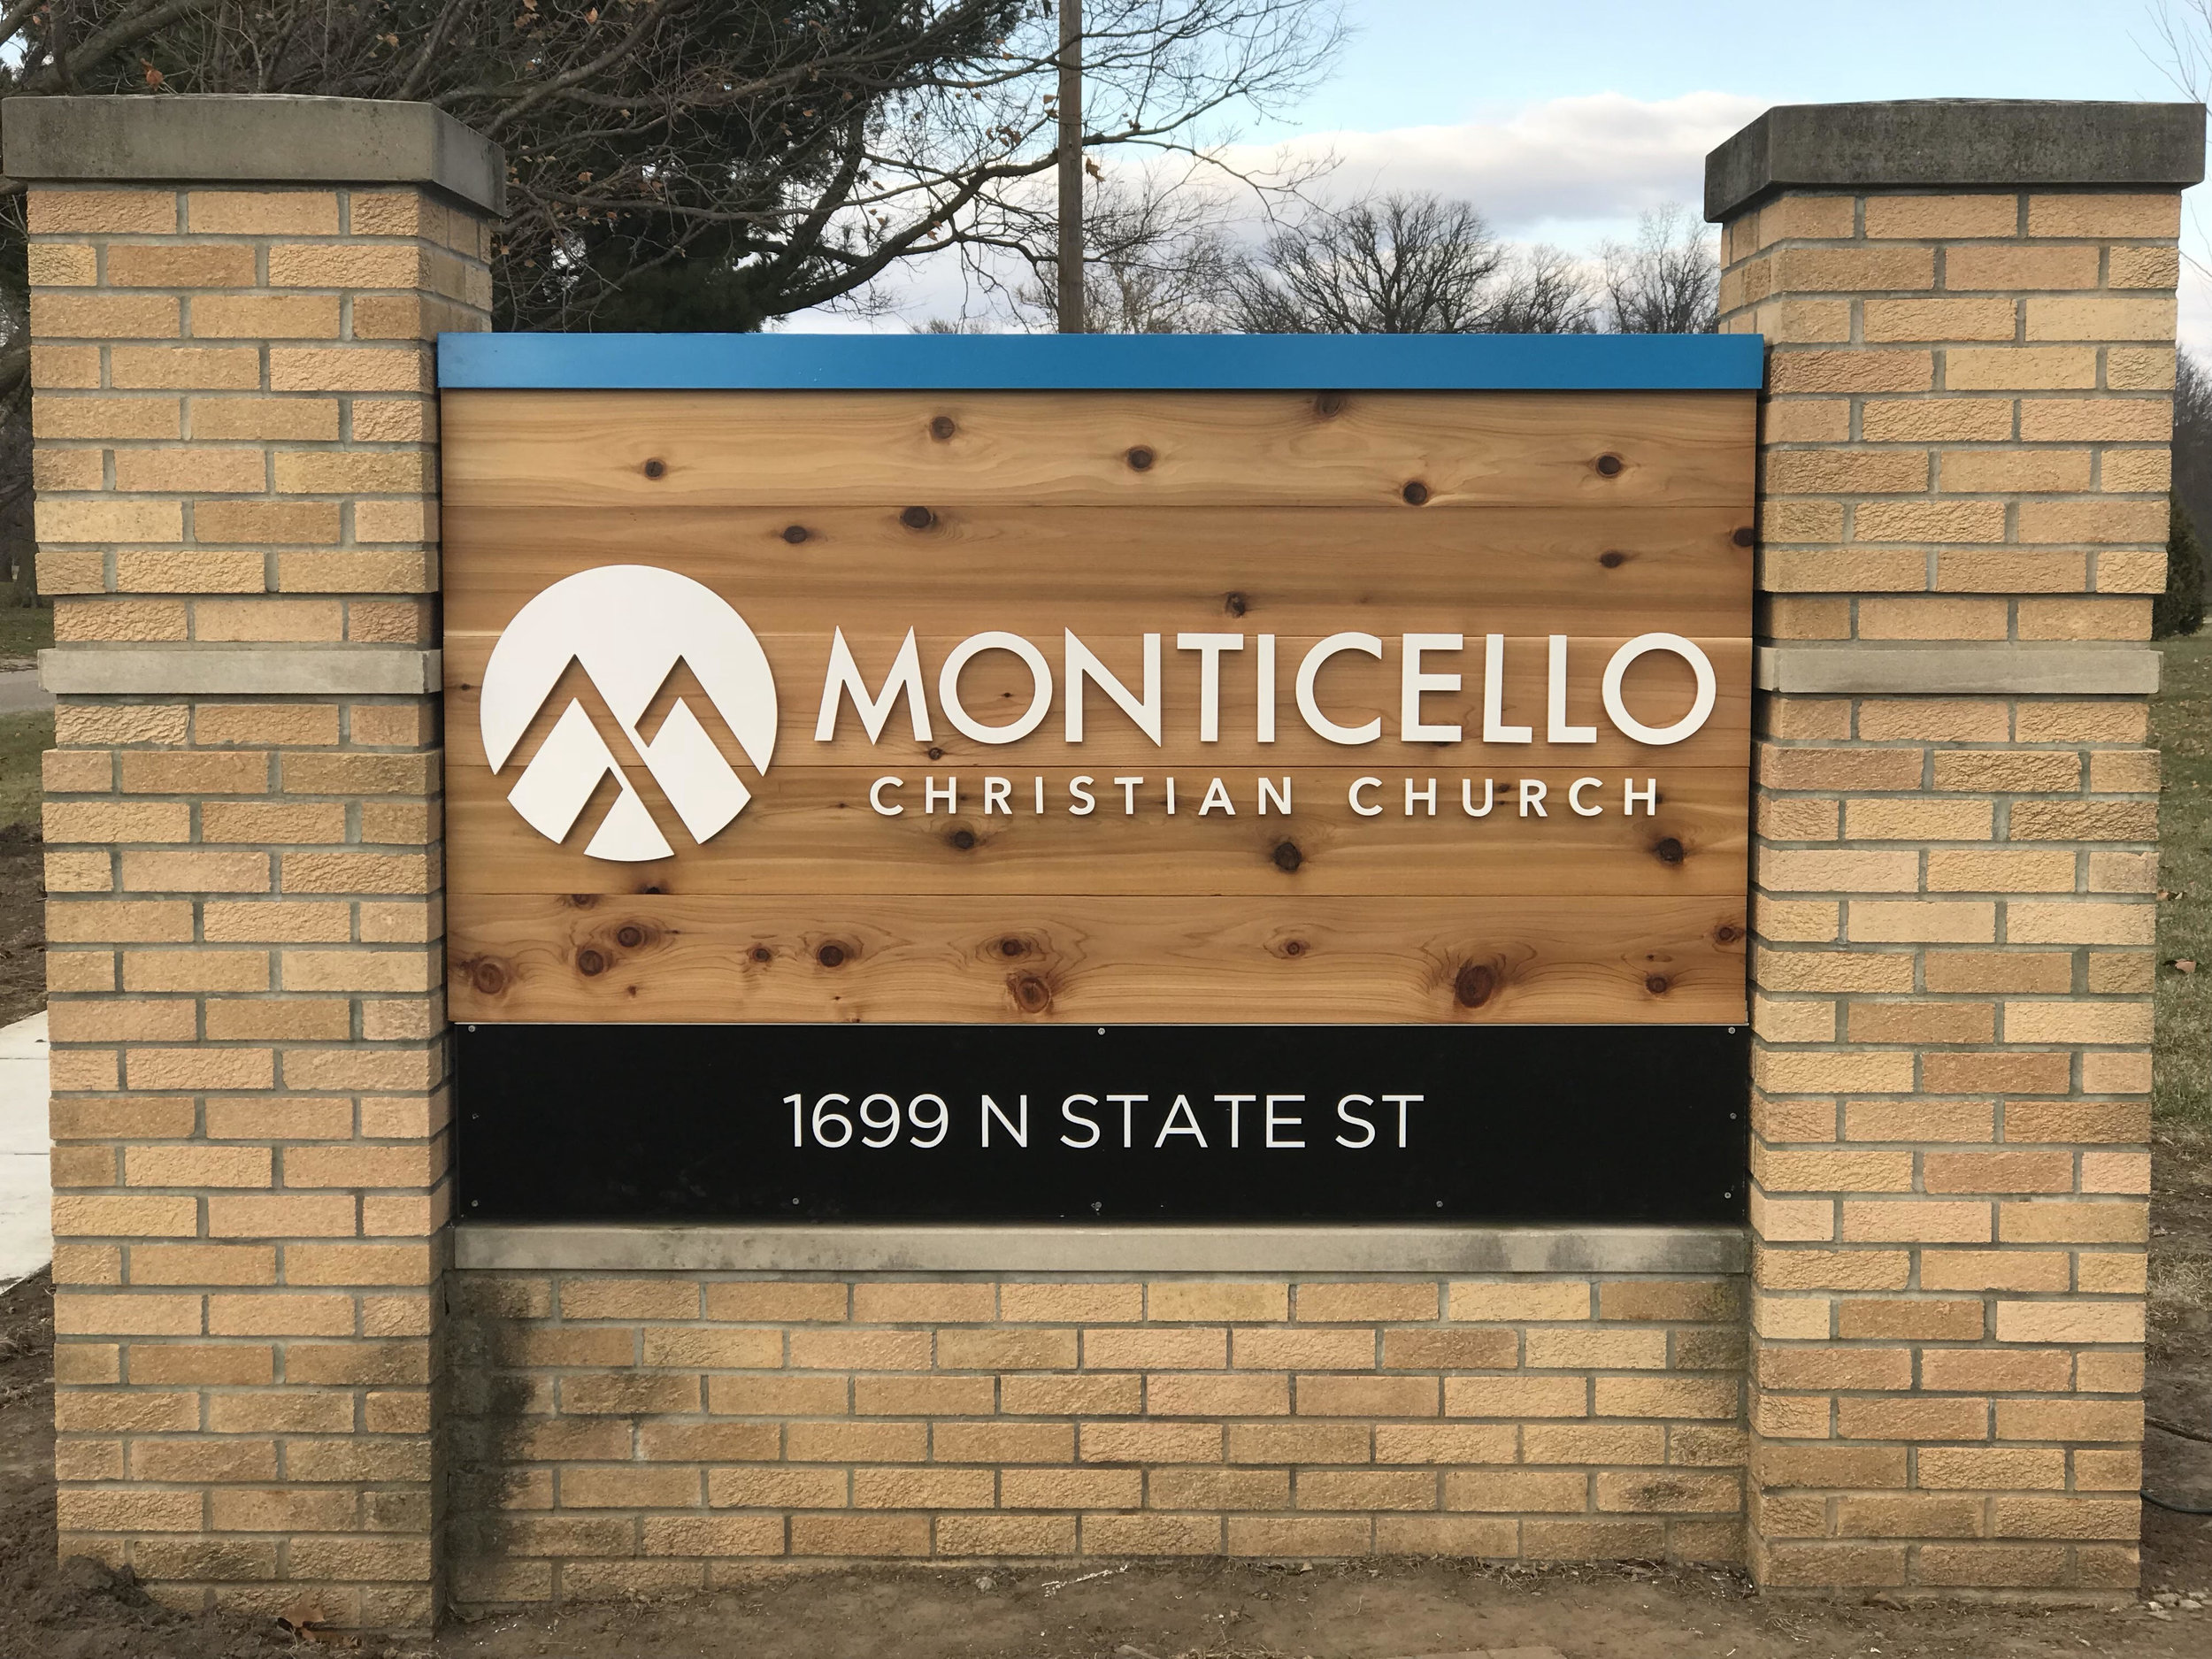 Big Picture Imagery Signs and Service - Monticello Christian Church - Outdoor Cedar Laser Cut Acrylic Dimensional Sign.jpg